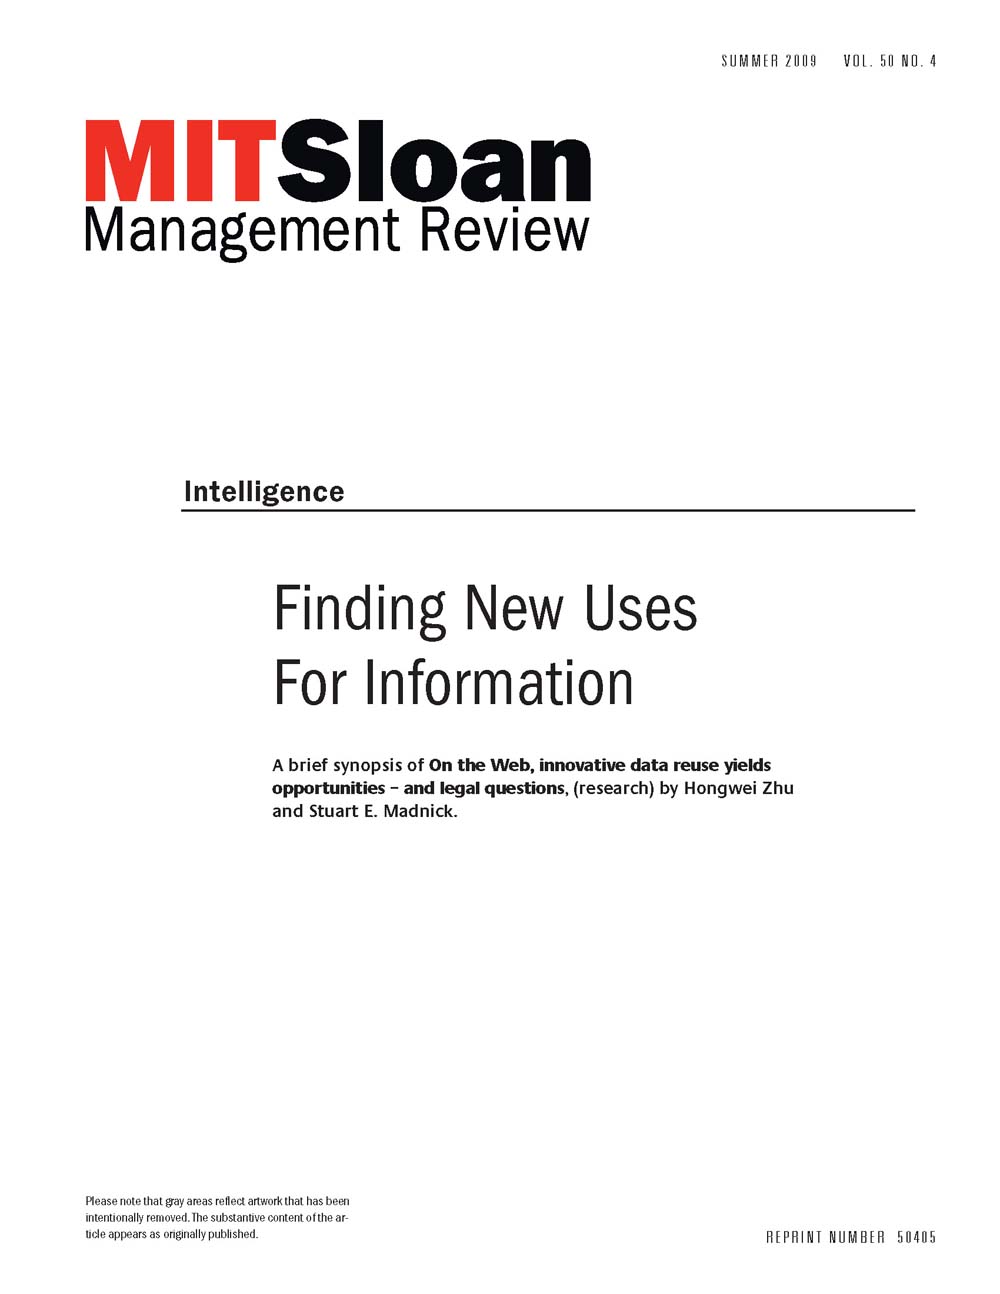 Finding New Uses For Information - MIT SMR Store